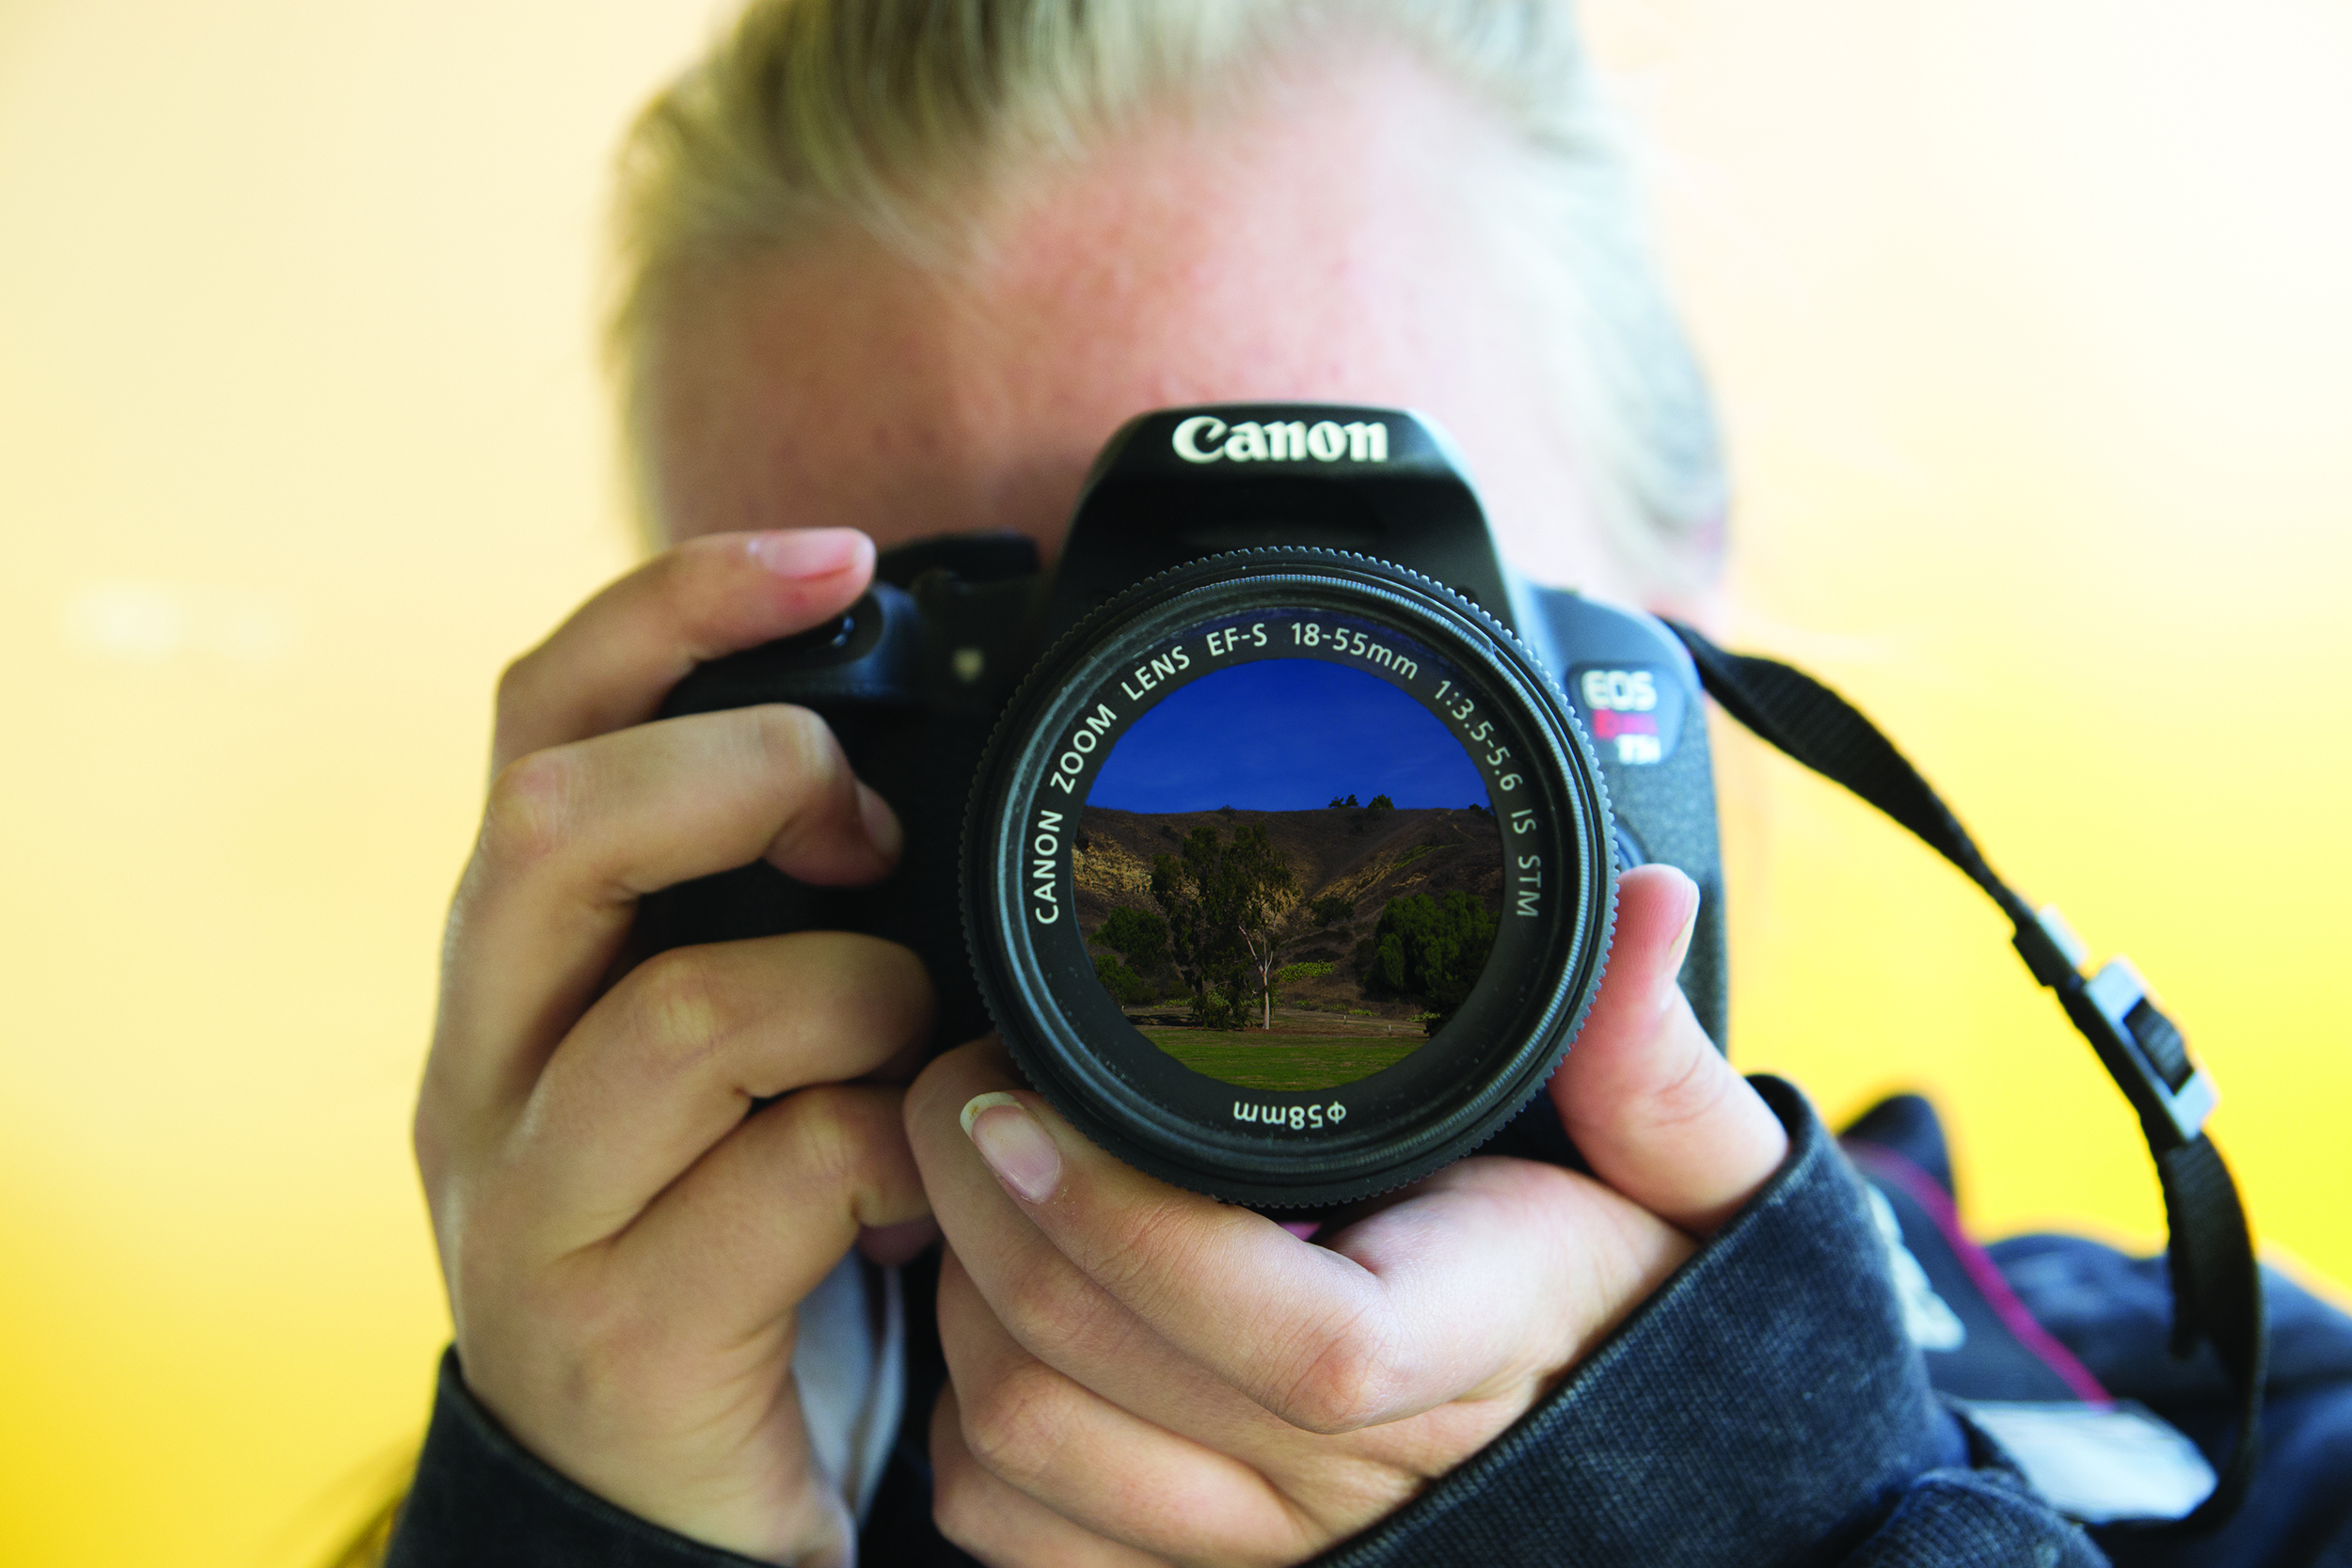 New photo club gives members a fresh perspective